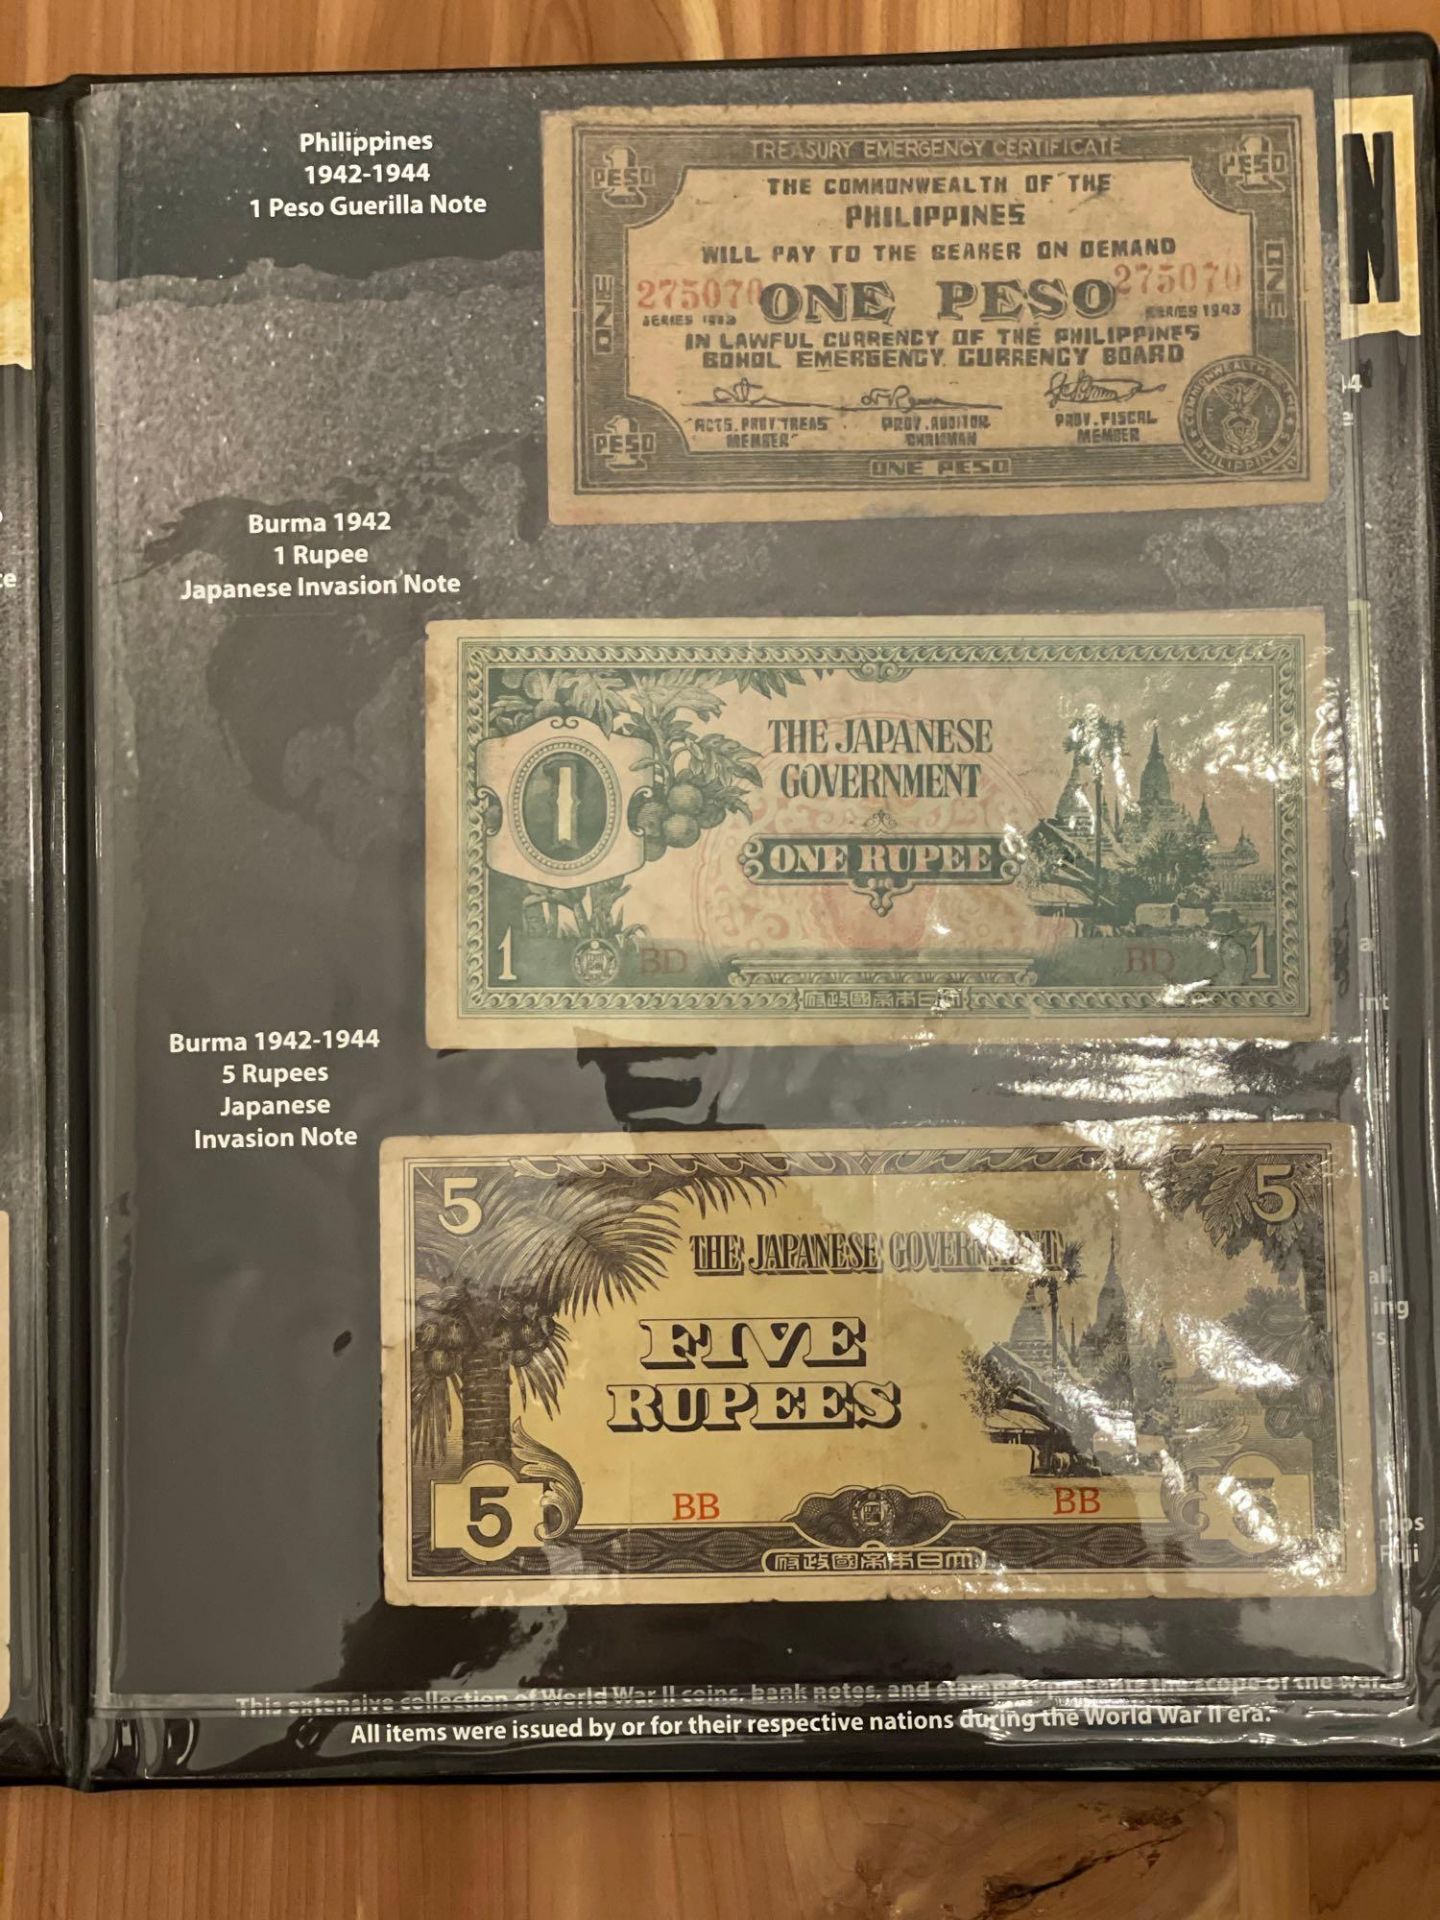 WW2 currency & more